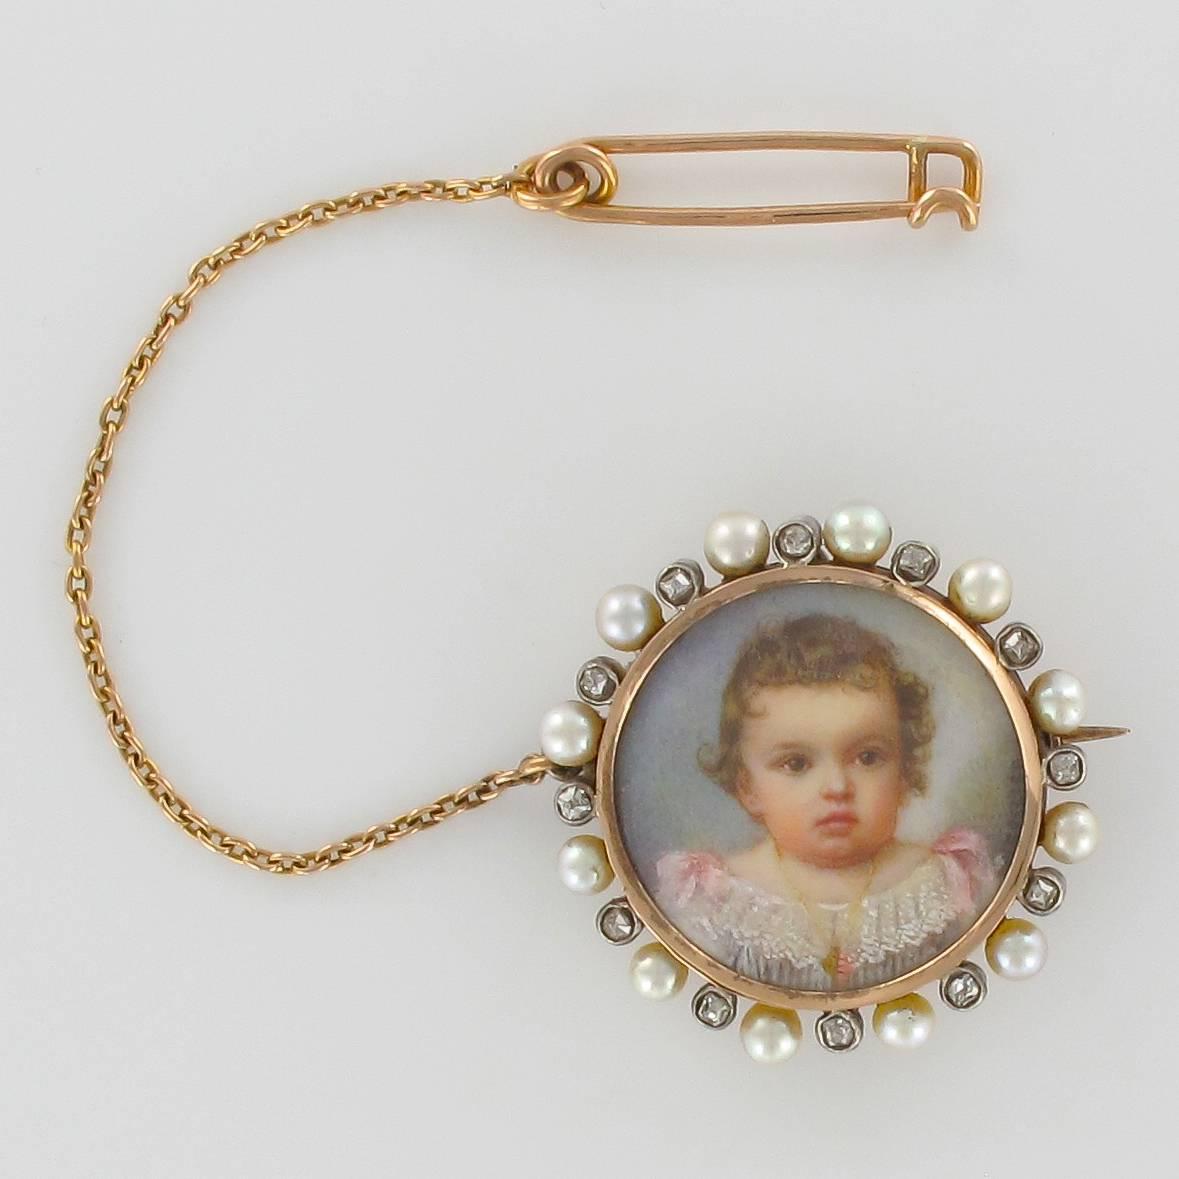 Brooch in silver and rose gold, 18 karats.
Delicate antique jewel, this antique brooch is made of a porcelain miniature representing the portrait of a girl protected by a crystal. The set is surrounded by rose-cut diamonds set closed and separated